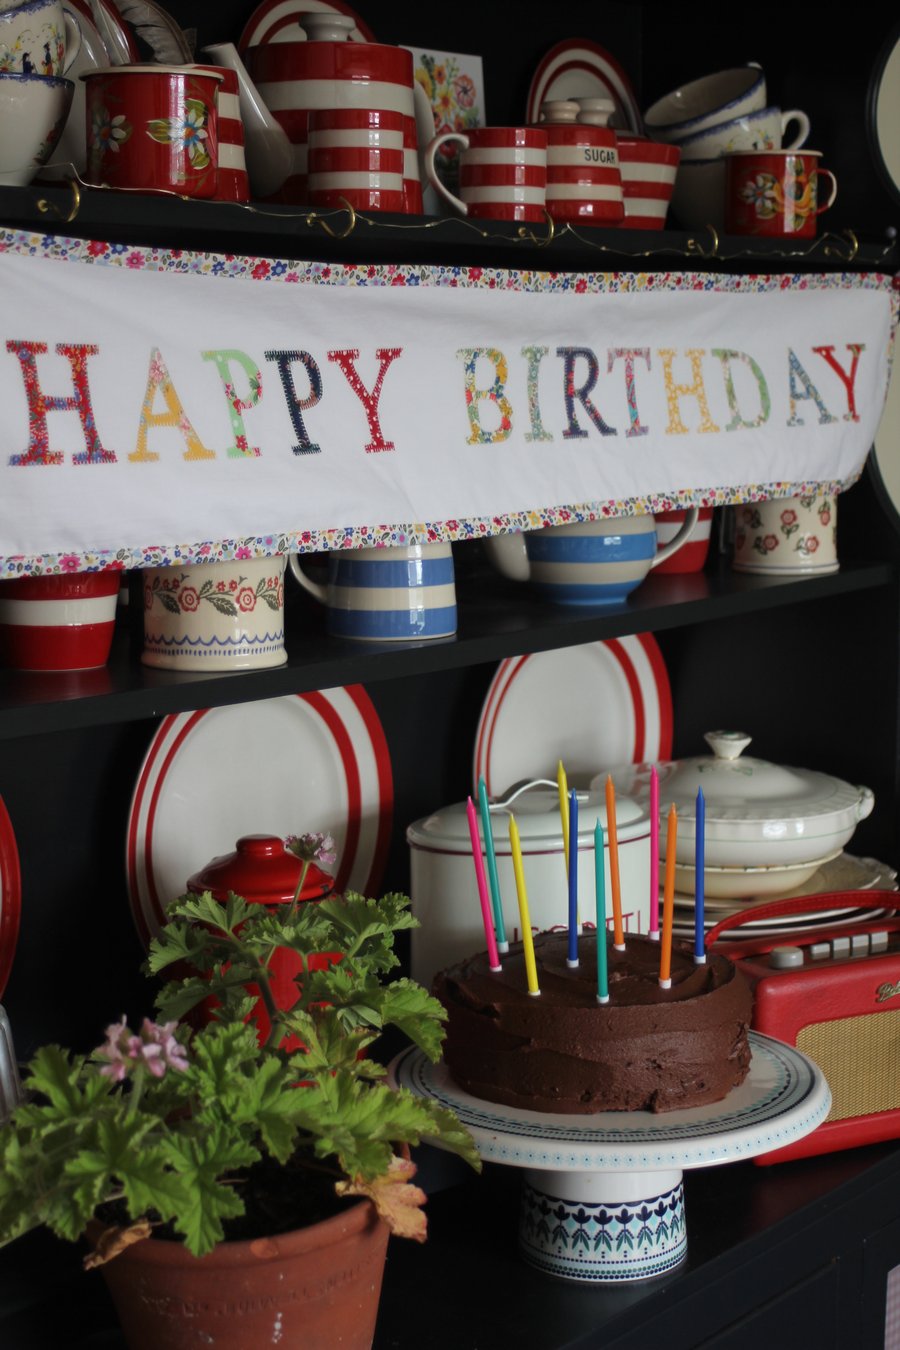 Floral 'Brights' Happy Birthday fabric banner